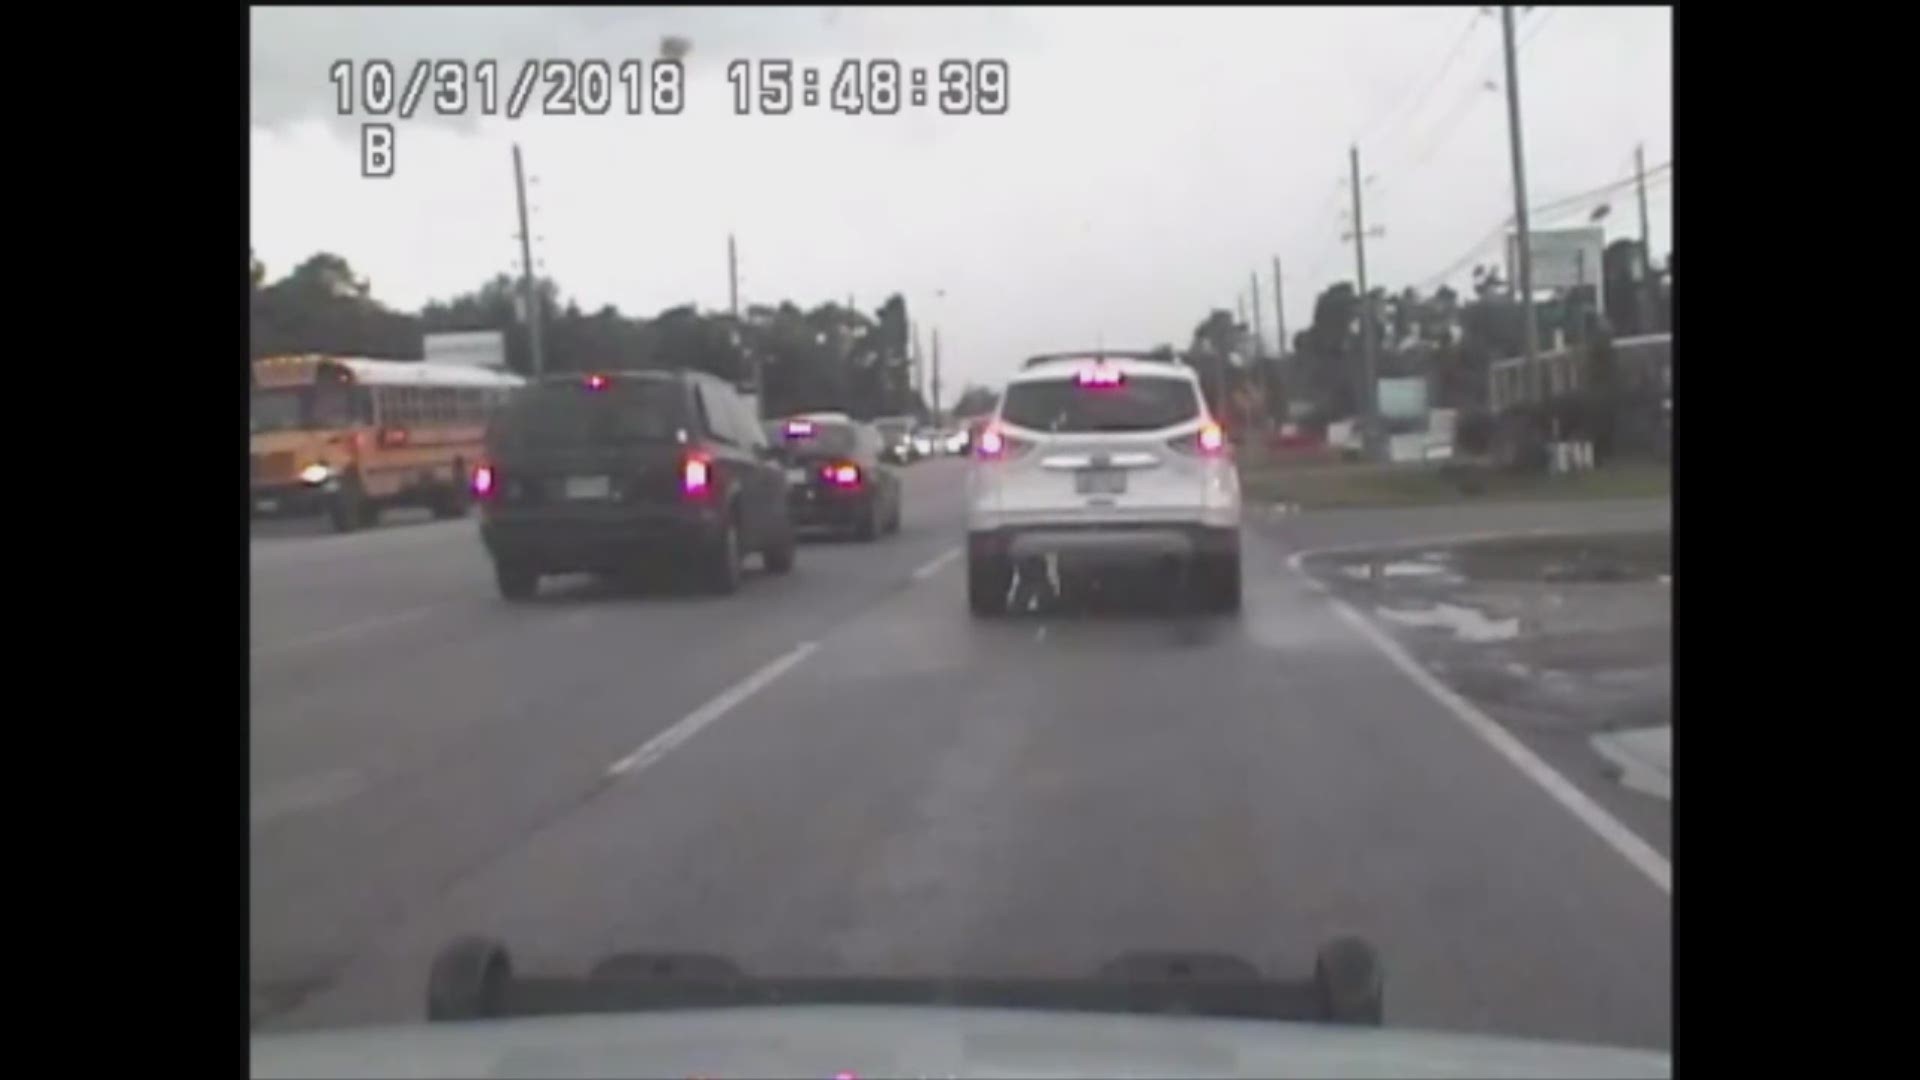 Harris County Sheriff's deputies have released the raw dash camera footage of the shooting where a 17 year old boy was killed.